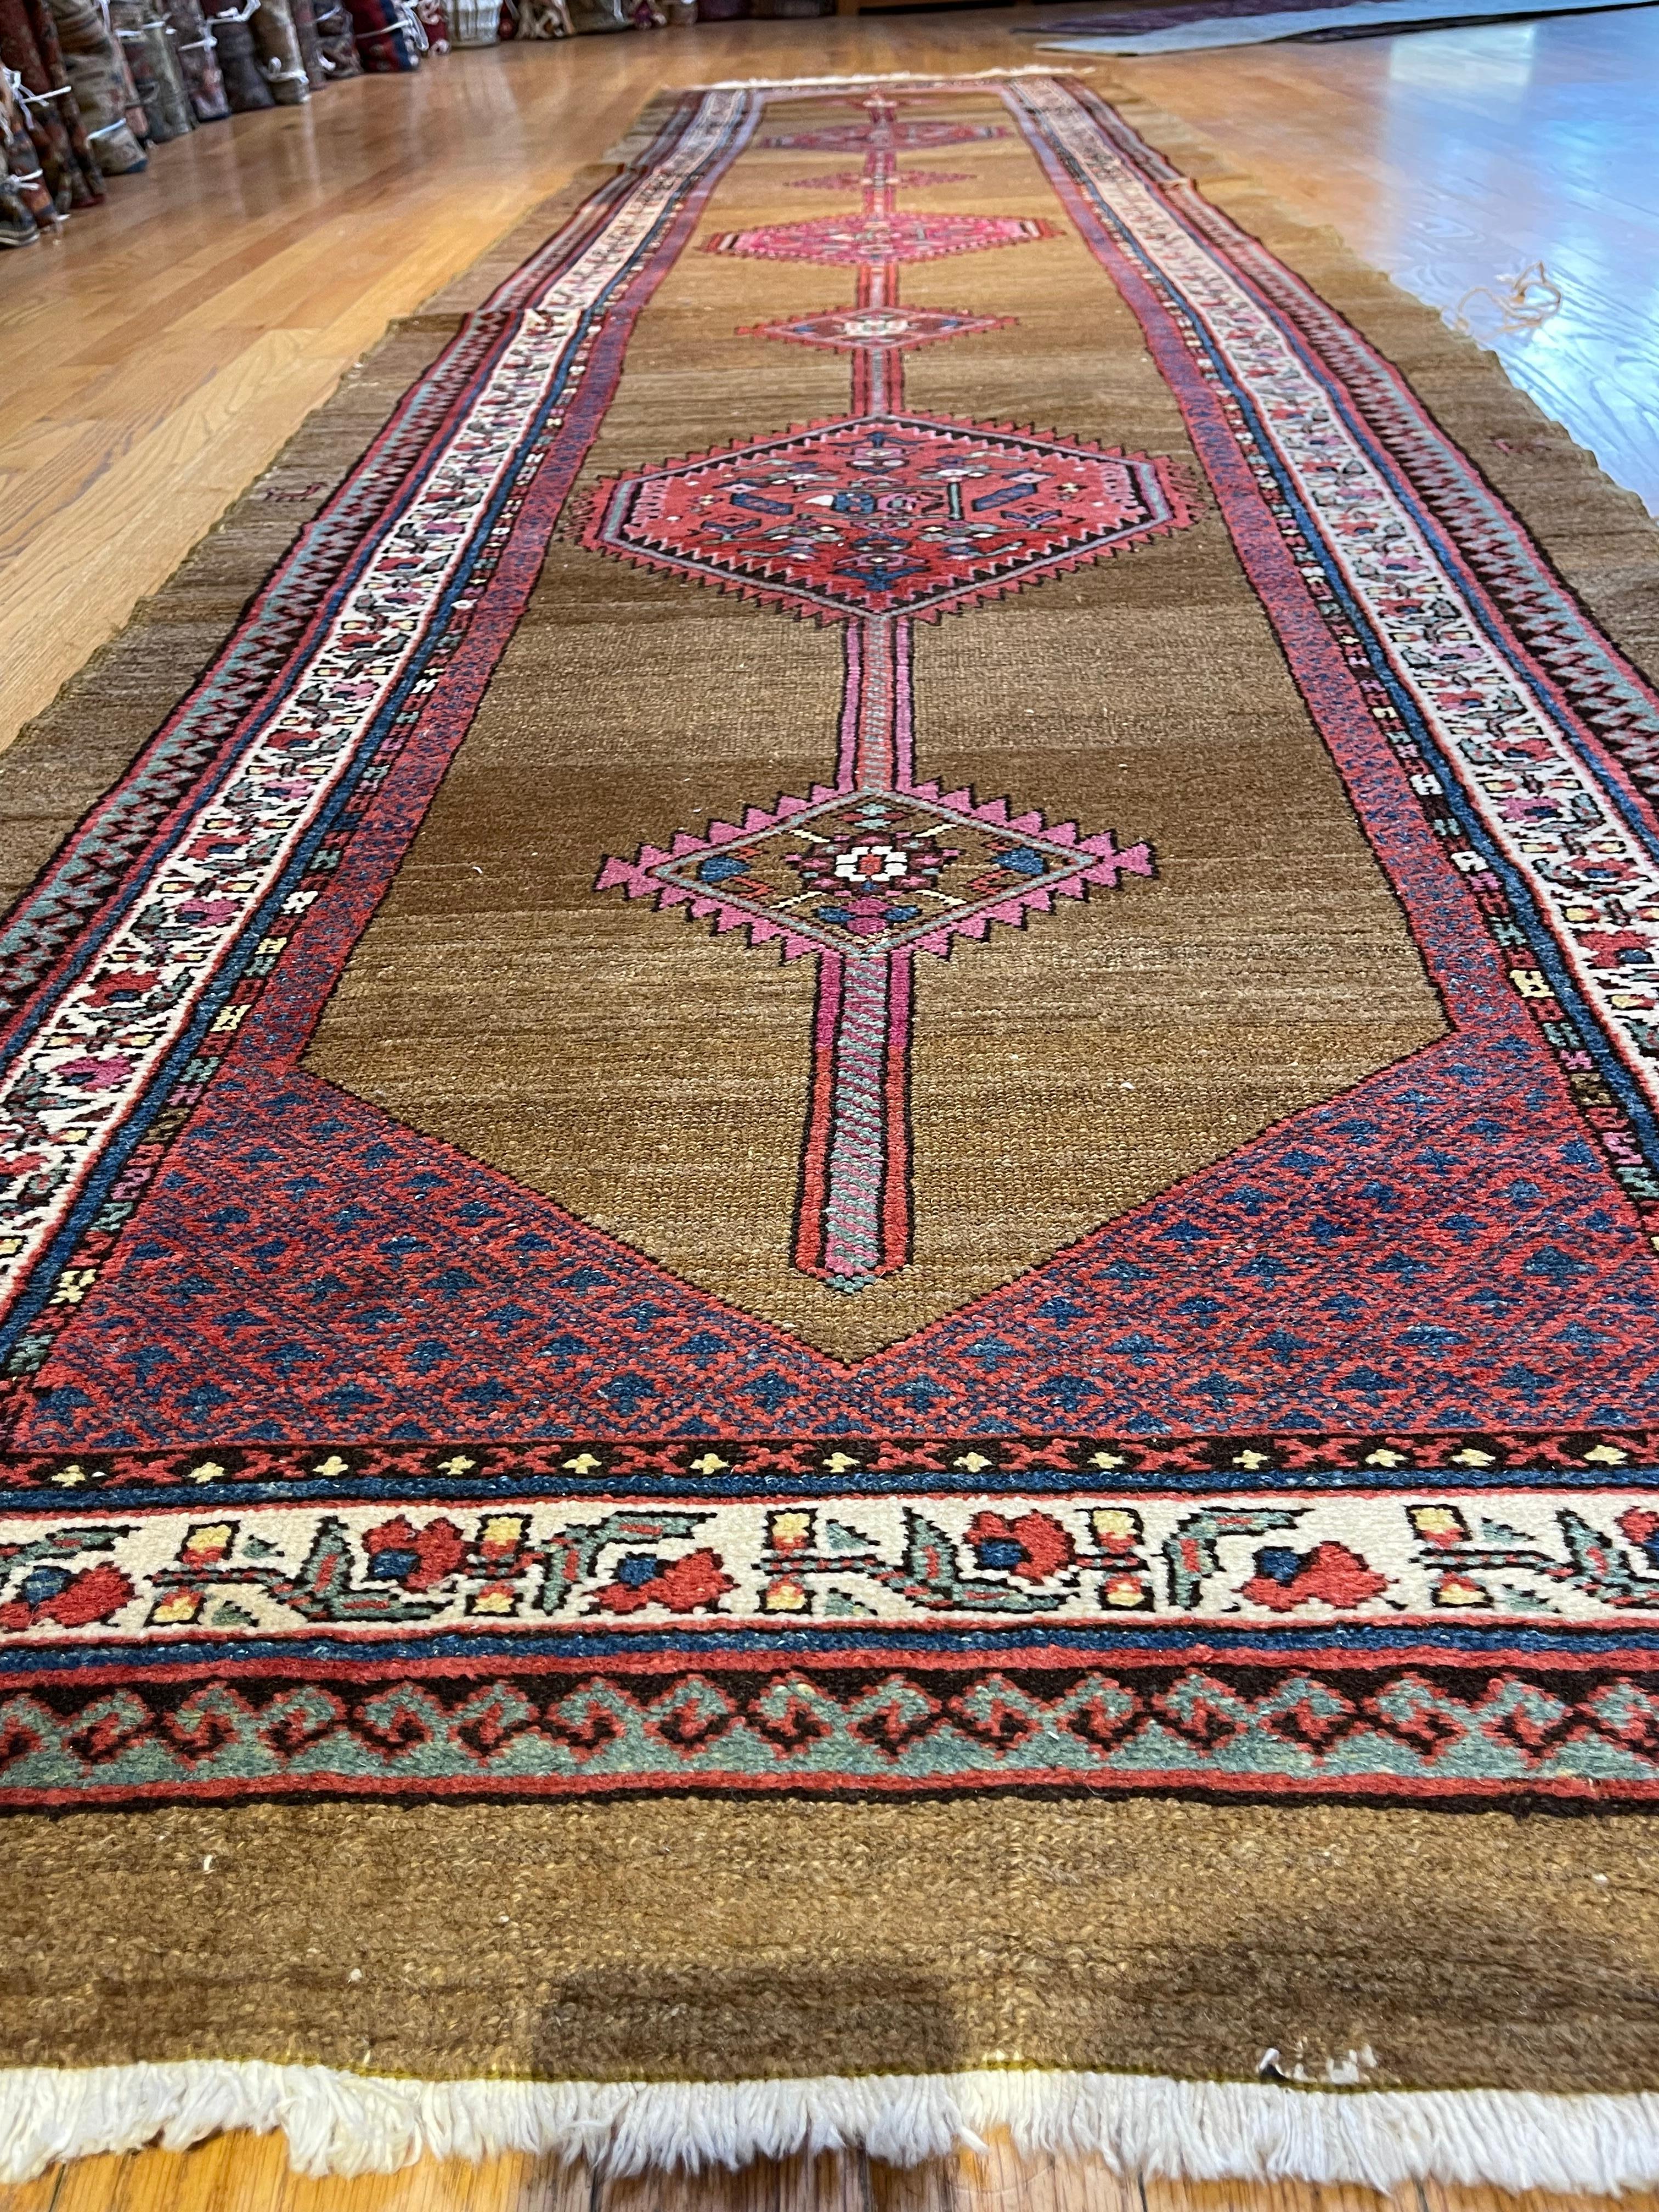 This runner was hand woven in the village of Serab, north west Persia. Hand spun camel wool, both natural and synthetic dye was used to make the runner. Village of Serab is known to make runners and not room size carpet, presumably because